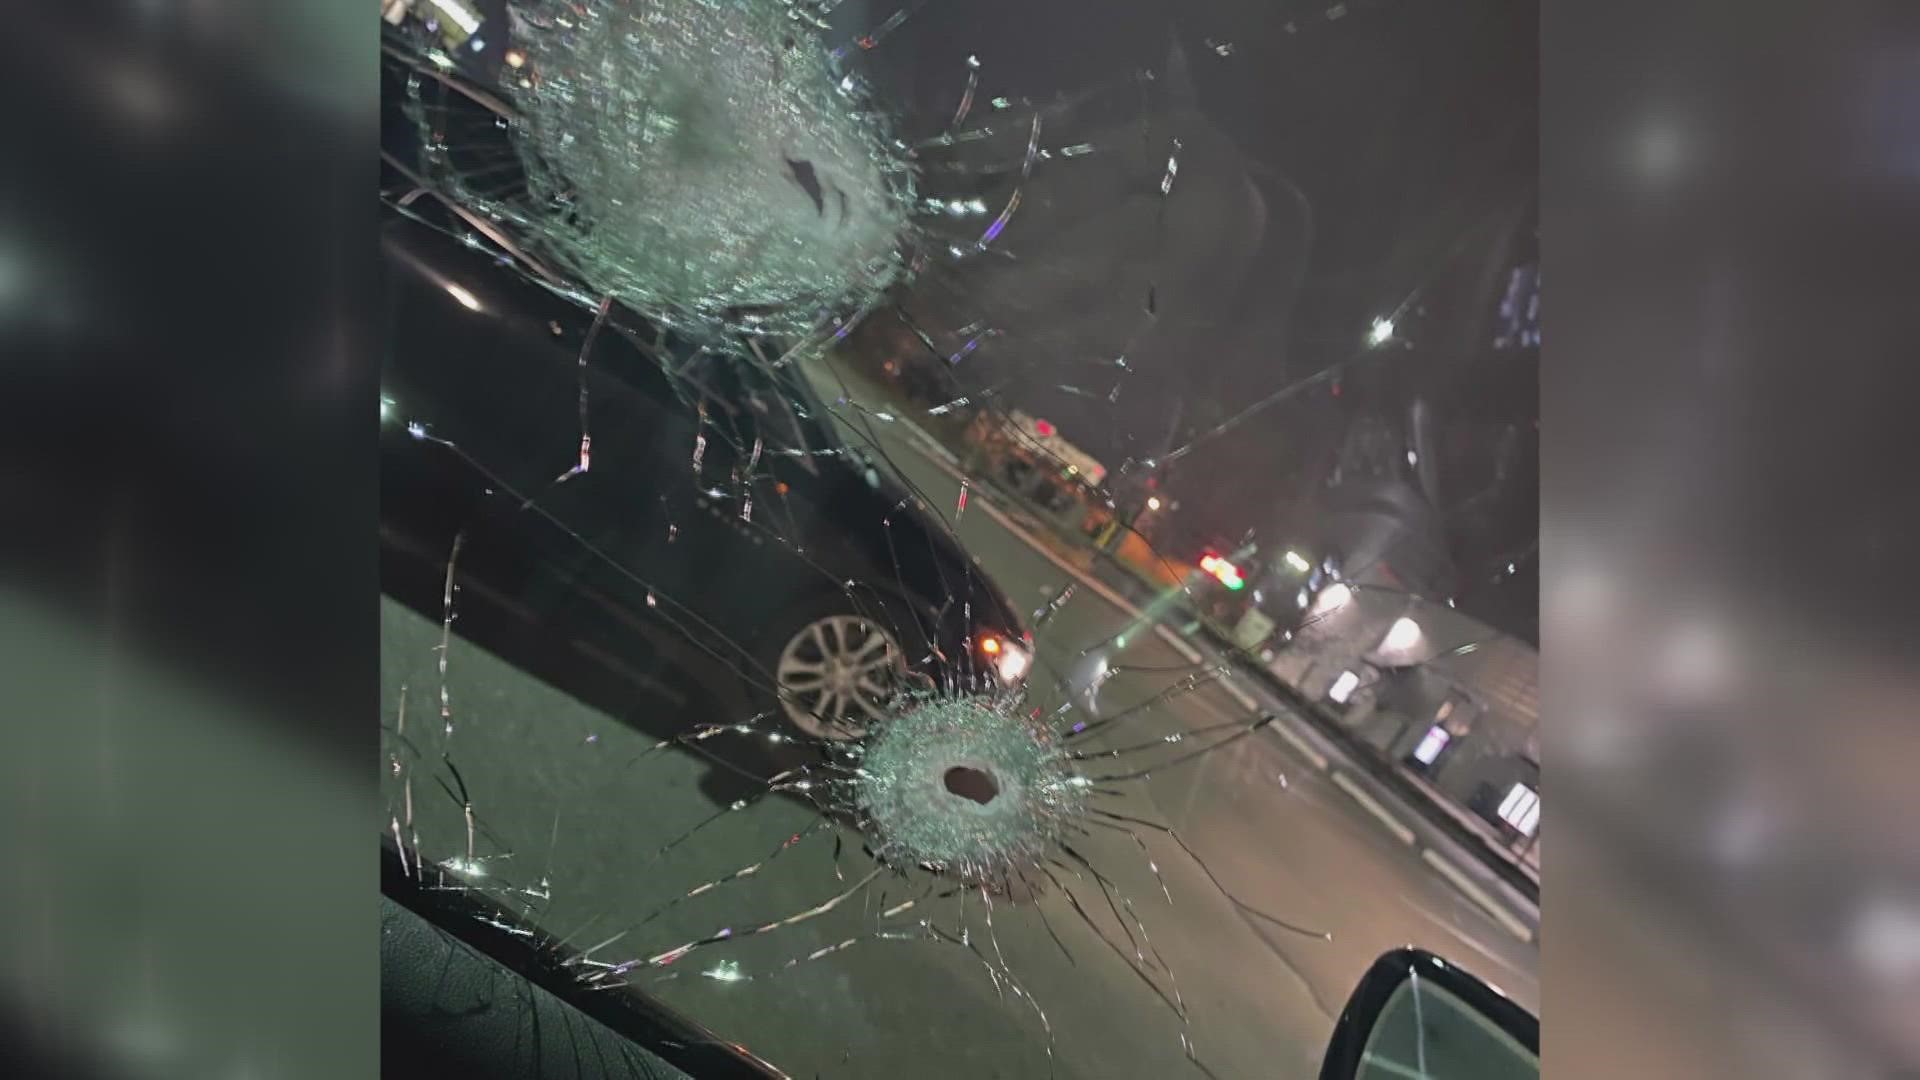 The comedian and frequent contributor to the 'Bob & Tom Show' told 13News he felt the attack was targeted, and that he found nine bullet holes in the car.